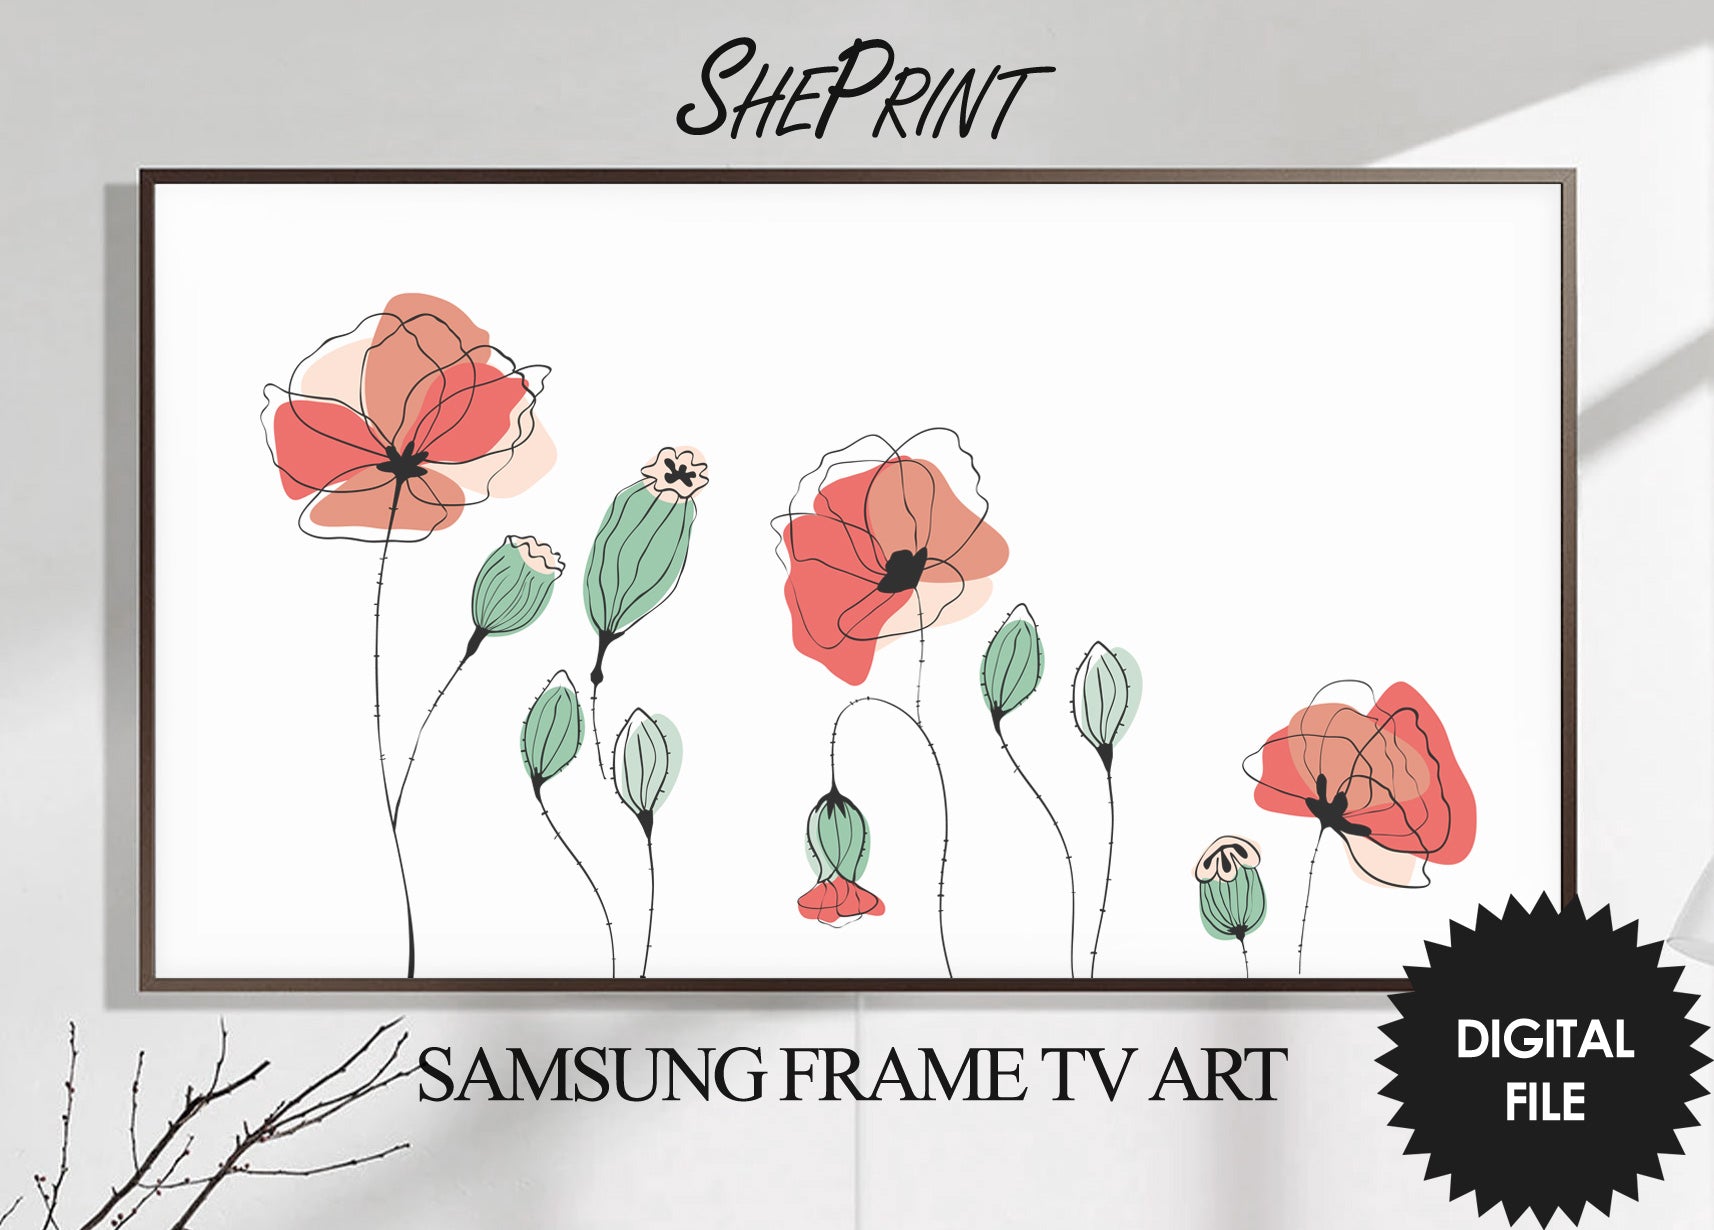 Samsung Frame TV Art Poppies | Simple Red Poppy Tv Art | Abstract Line Art With Color | 3840x2160px JPEG | Digital TV Art | Instant Download